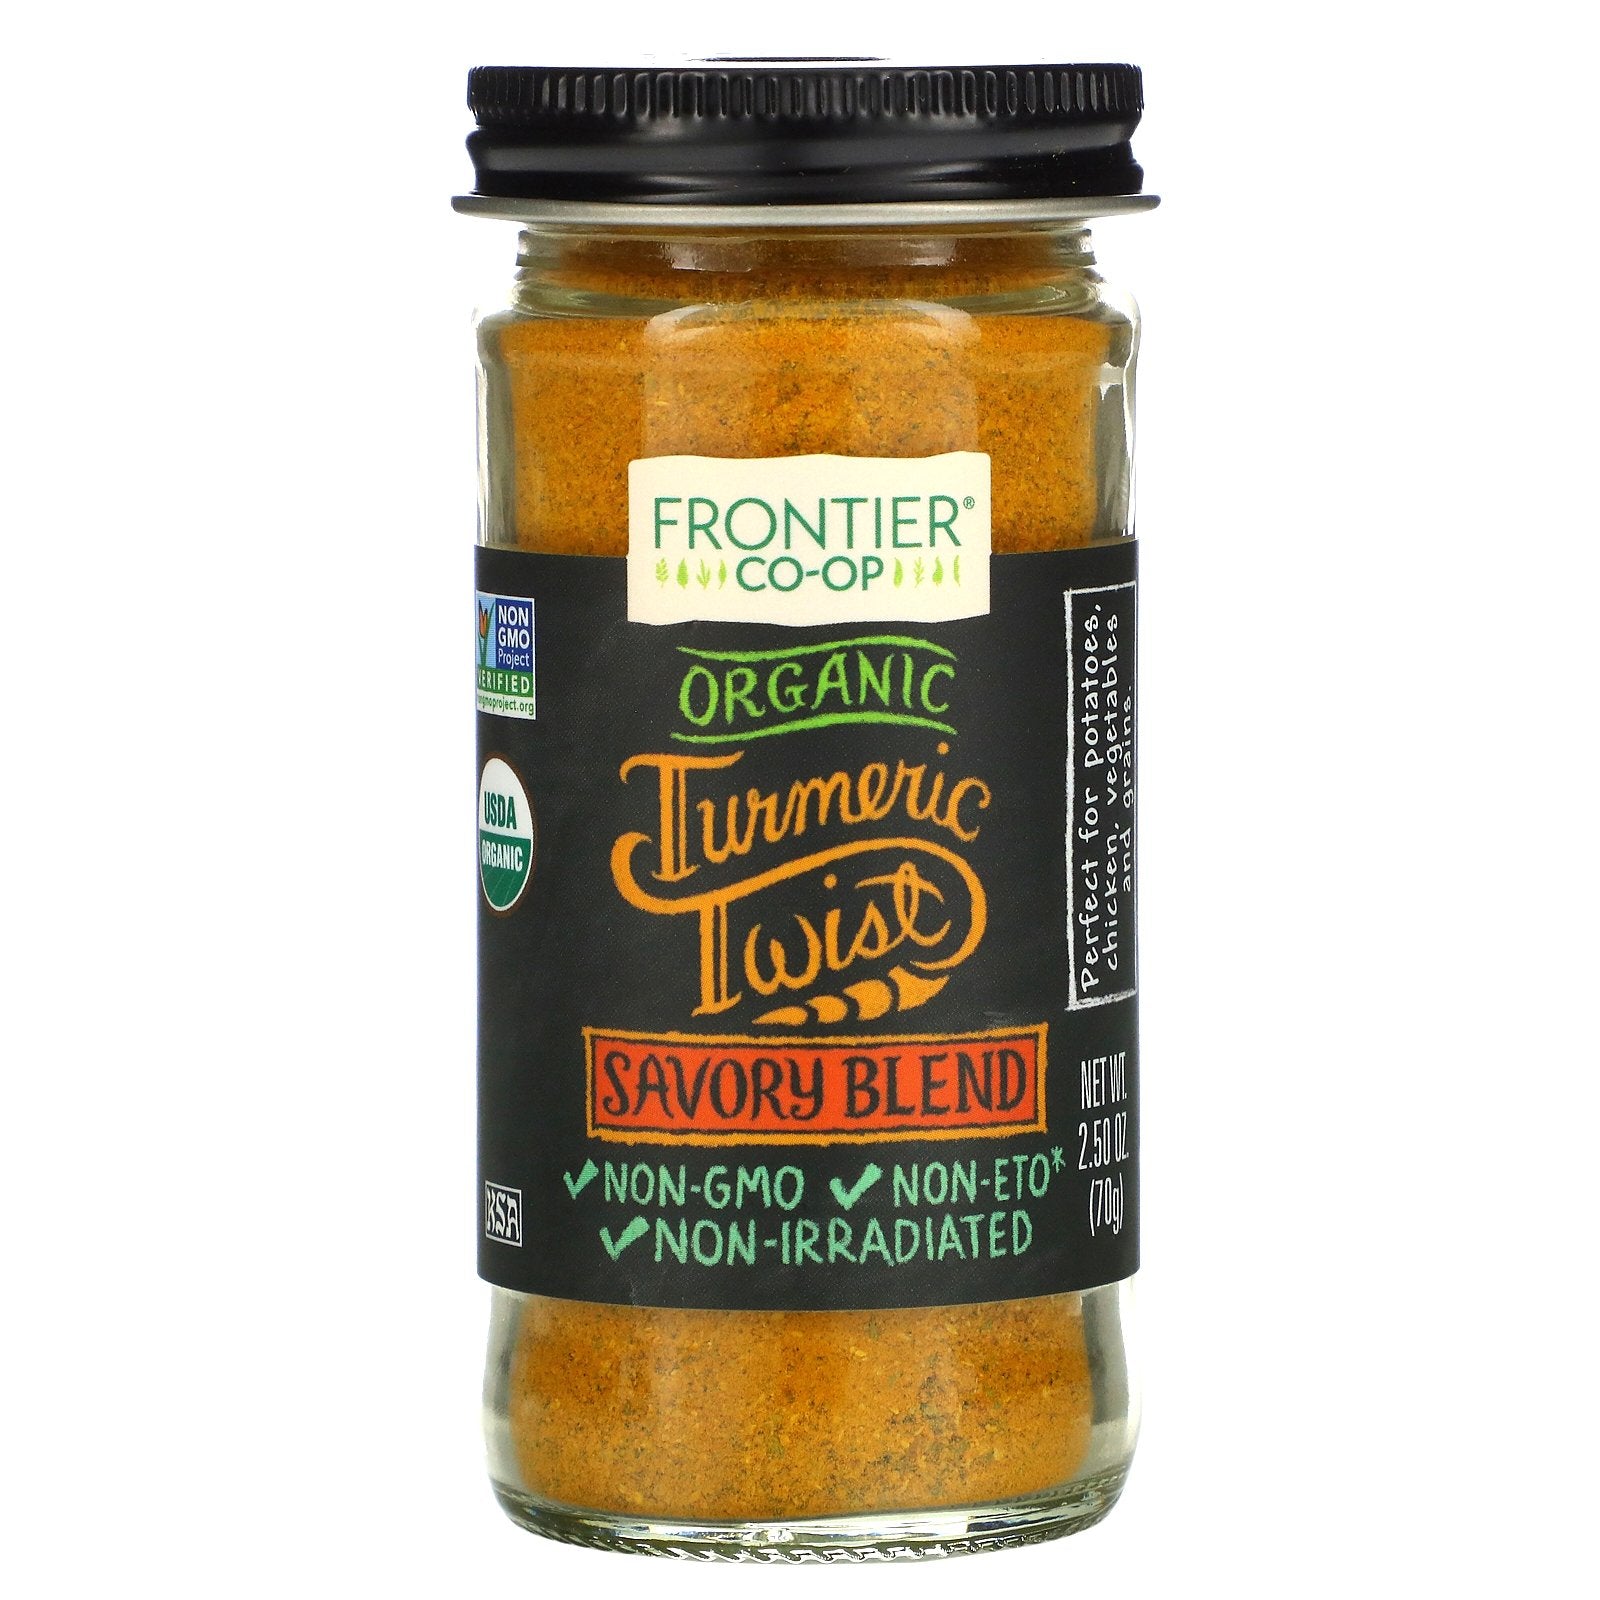 Frontier Natural Products, Organic Turmeric Twist, Savory Blend, 2.50 oz (70 g)